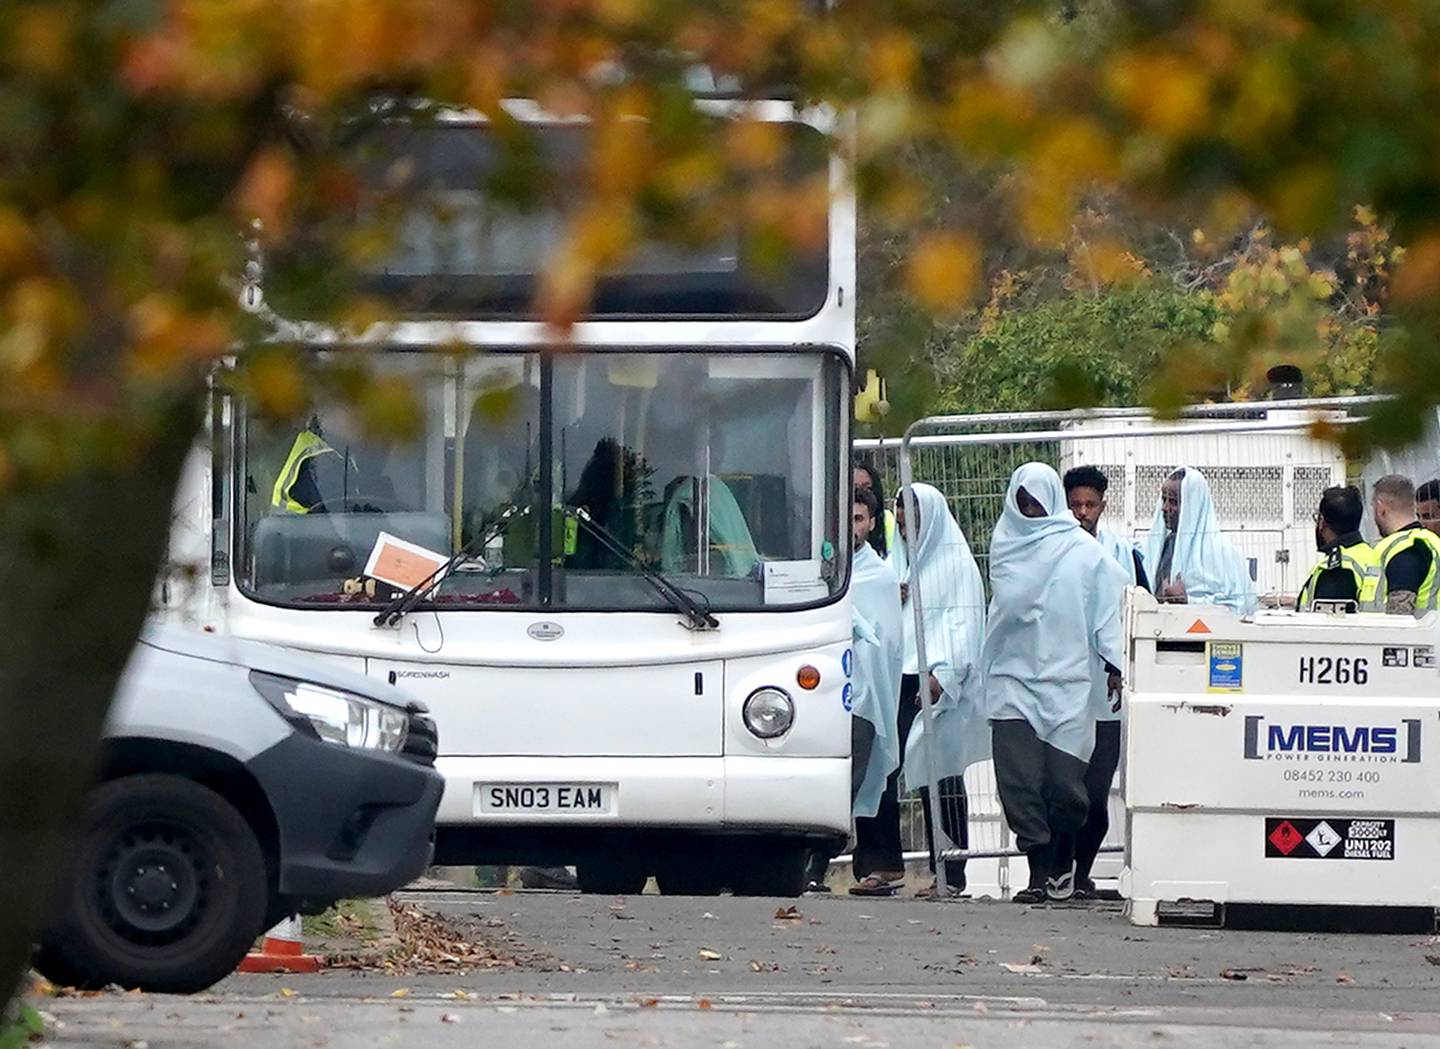 Migrants seen boarding buses at the Manston asylum processing site in Kent. PA.